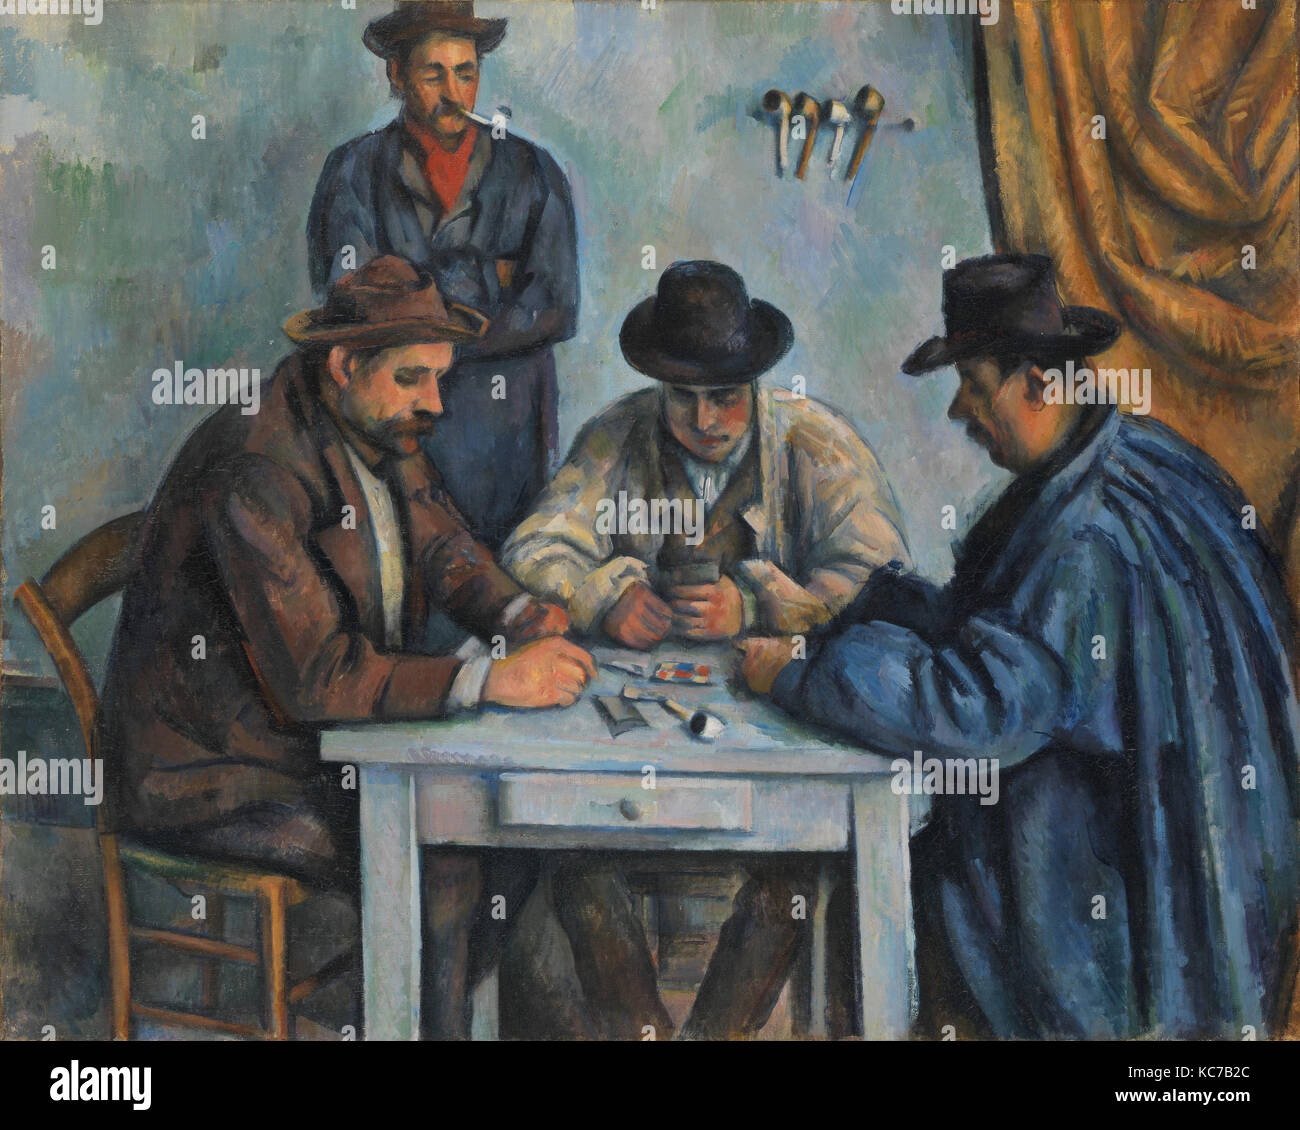 The Card Players, 1890–92, Oil on canvas, 25 3/4 x 32 1/4 in. (65.4 x 81.9 cm), Paintings, Paul Cézanne (French, Aix-en-Provence Stock Photo